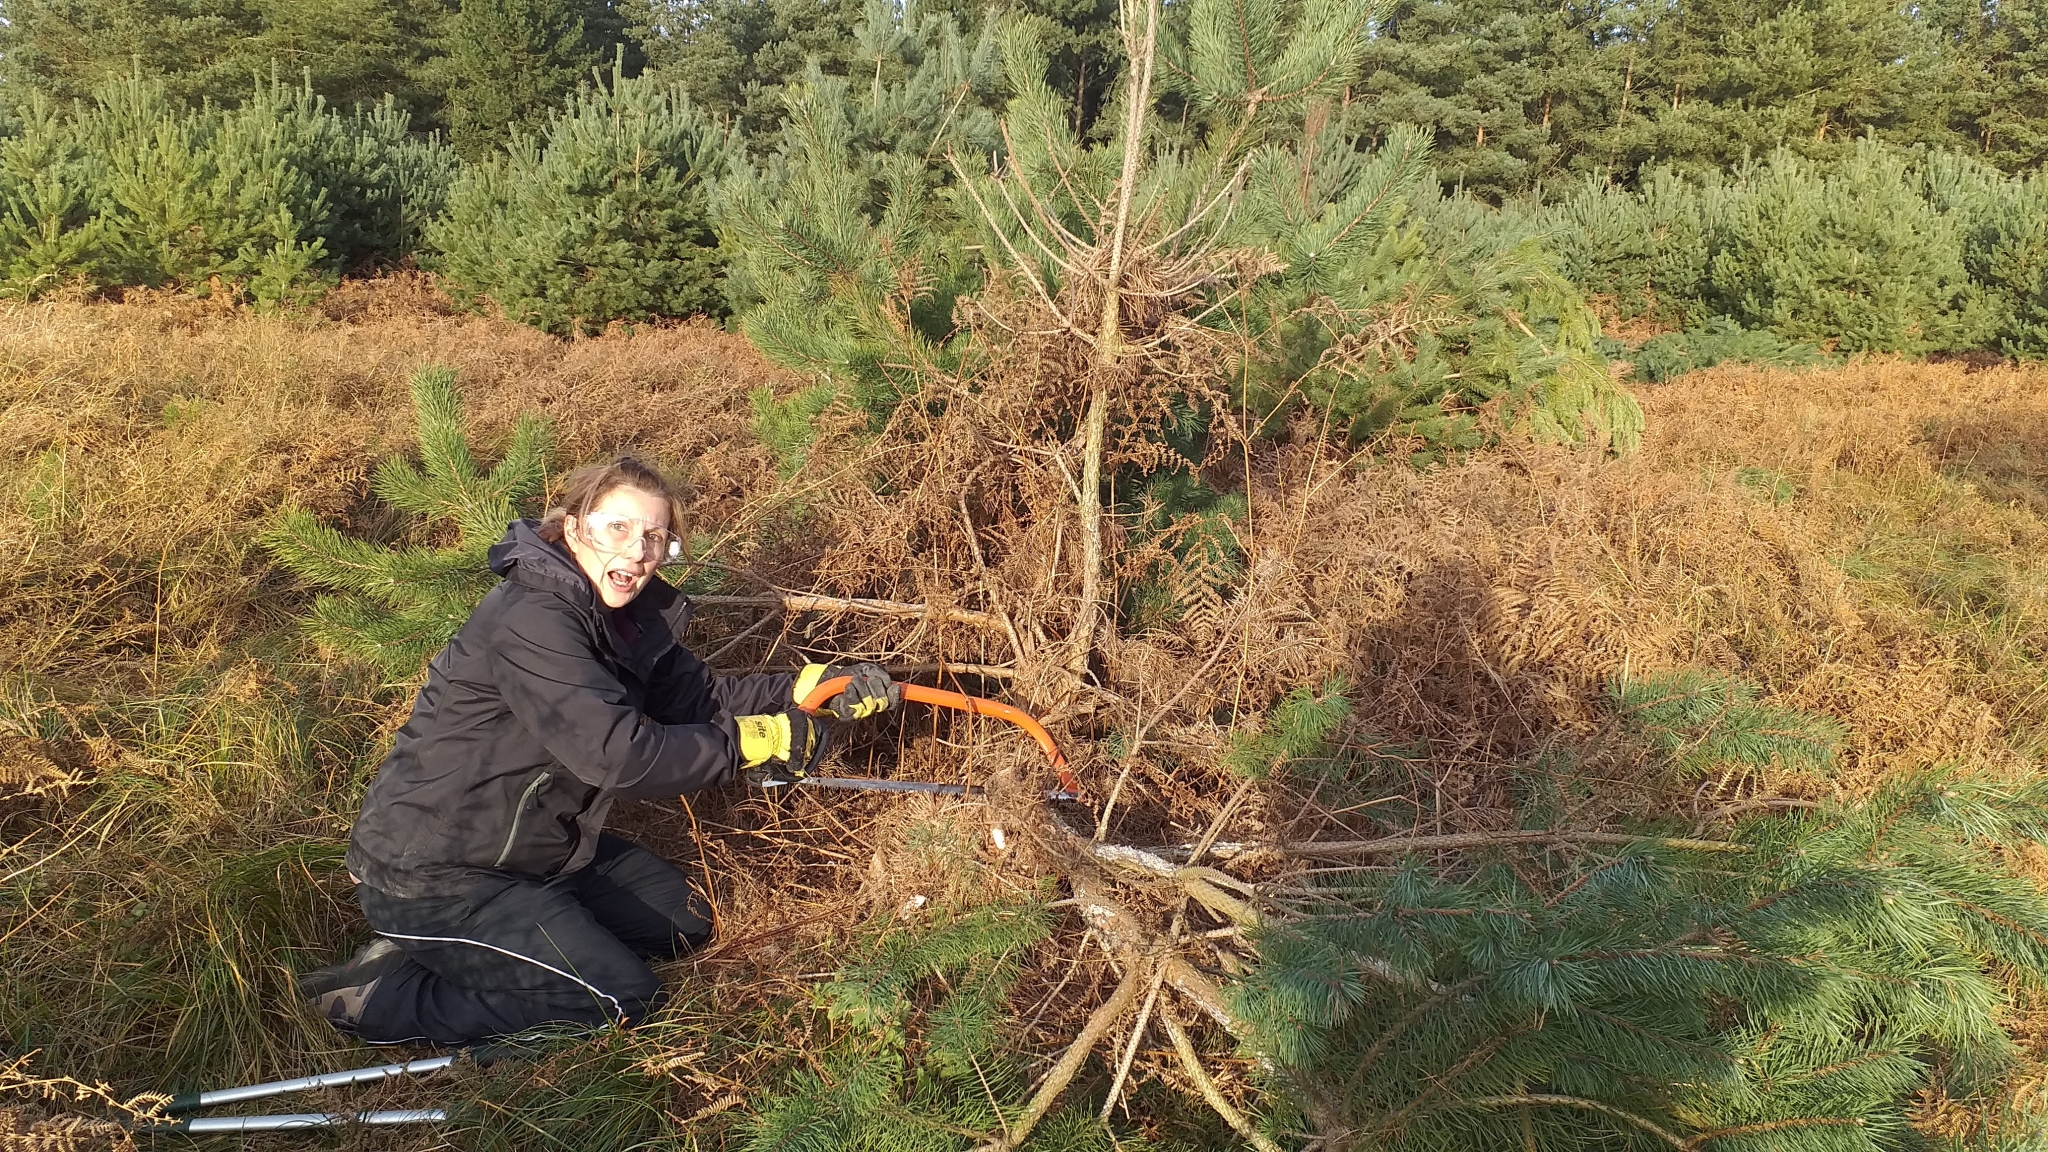 A photo from the FoTF Conservation Event - December 2019 - Self Seeded Pine Tree Removal on the Goshawk Trail : A volunteers cuts down a pine tree with a saw